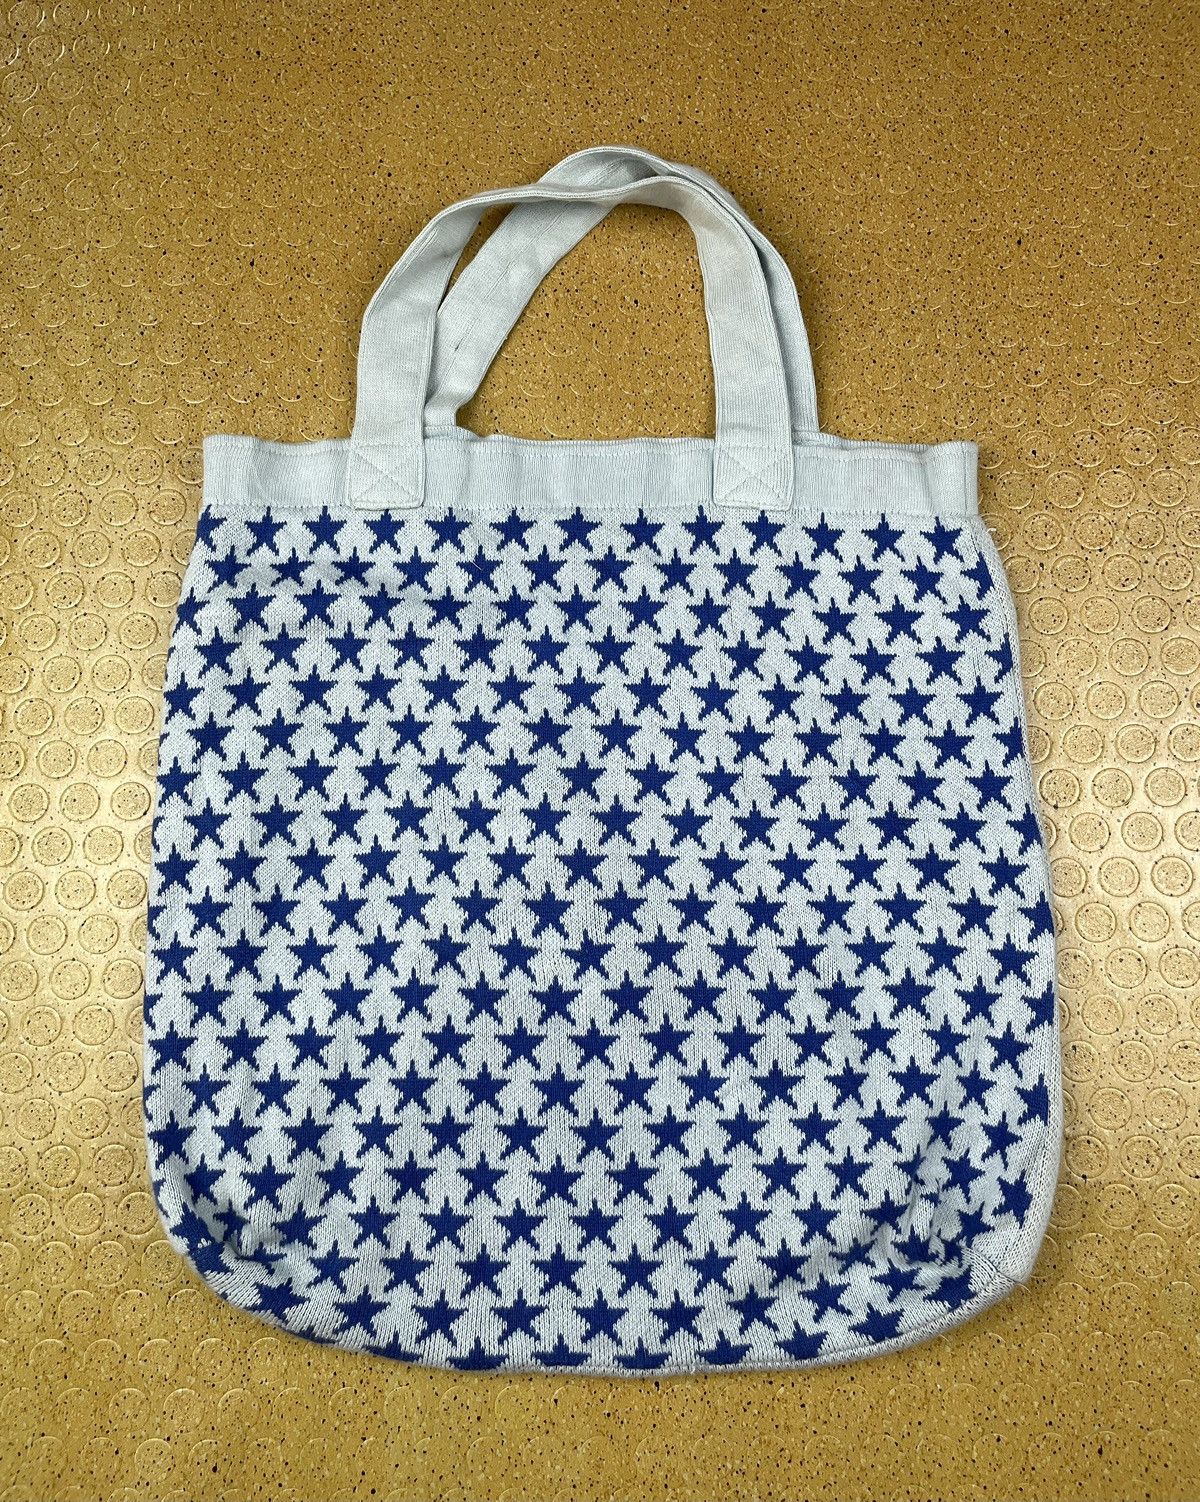 hysteric glamour tote bag tc10 - 3